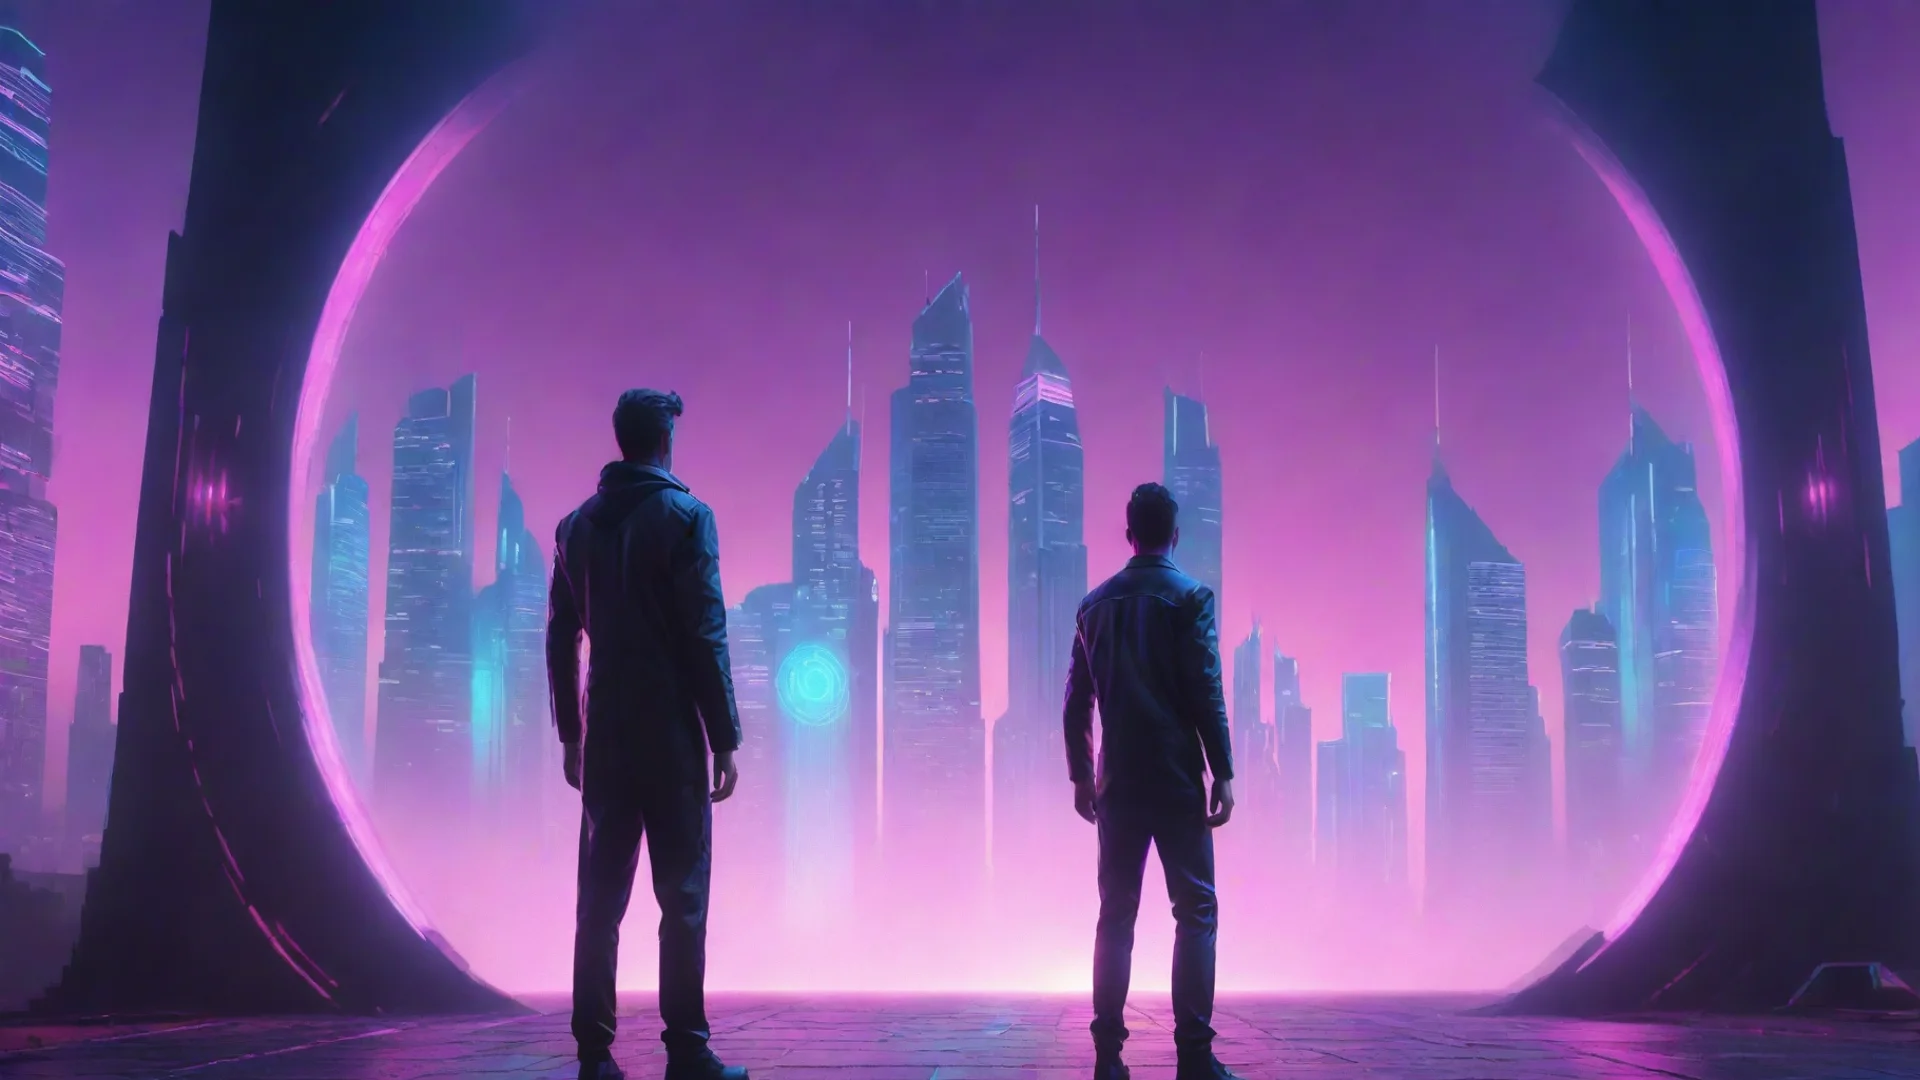 aiamazing synthwave of a man standing behind the portal of the futuristic city awesome portrait 2 wide